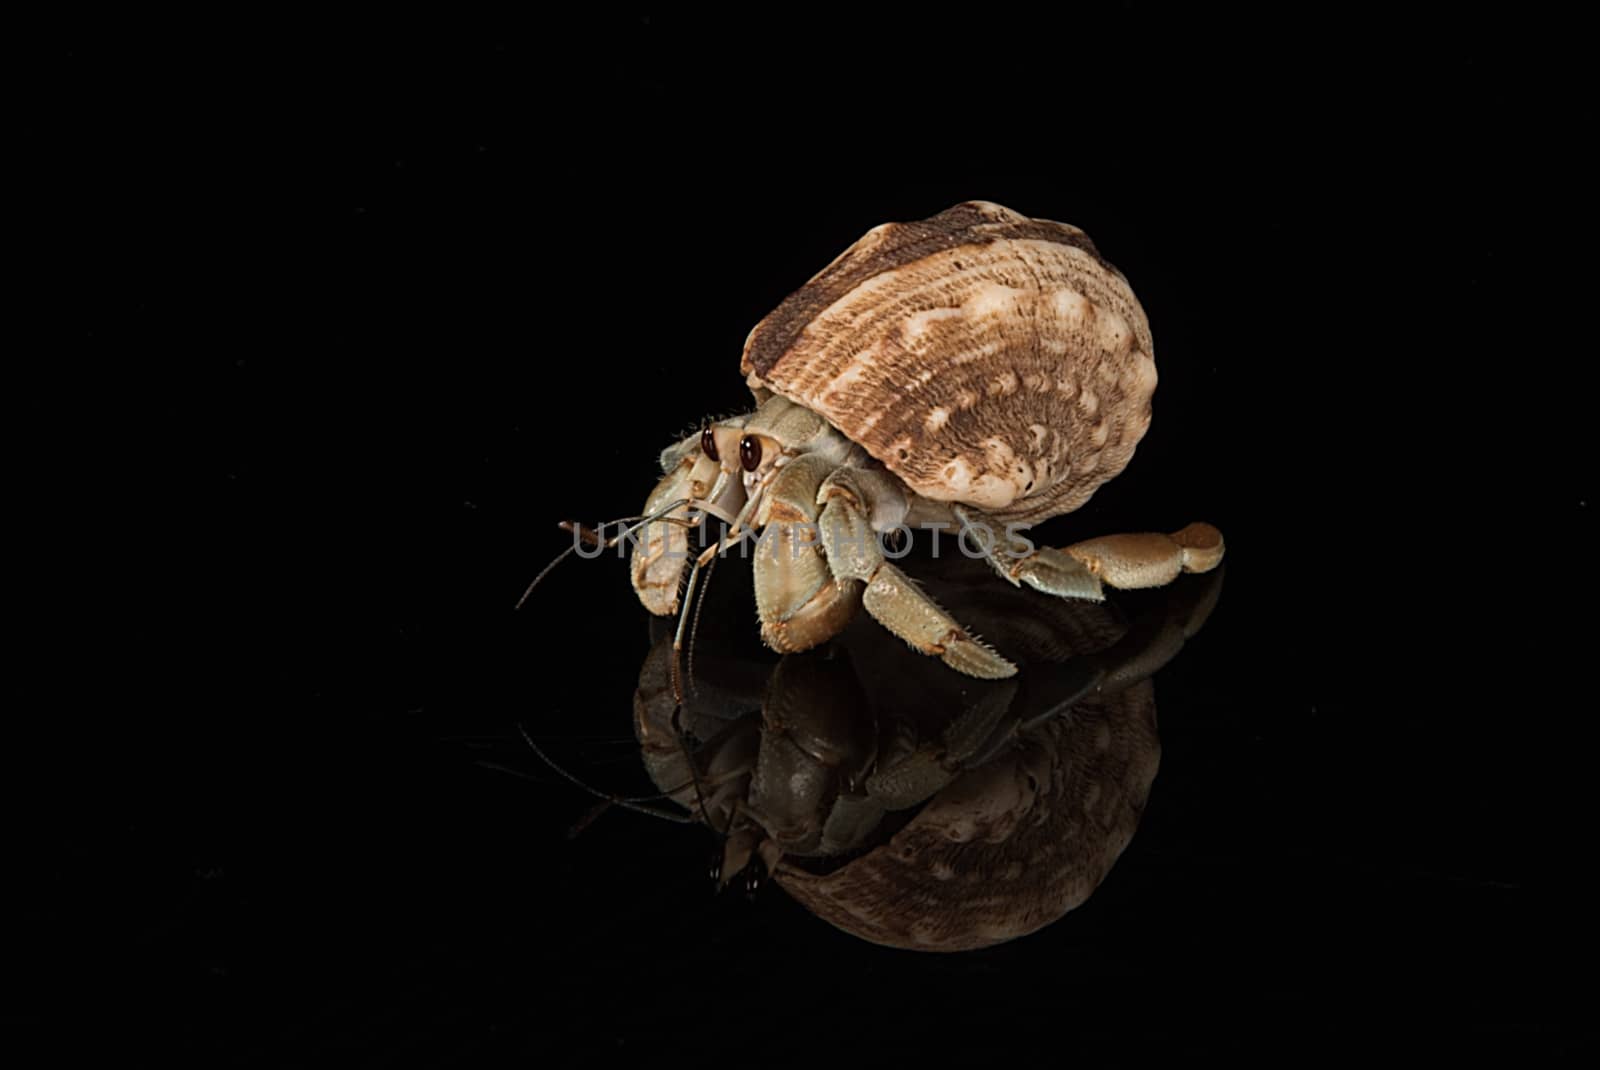 A hermit crab emerged for its host shell with reflection and set on a black background